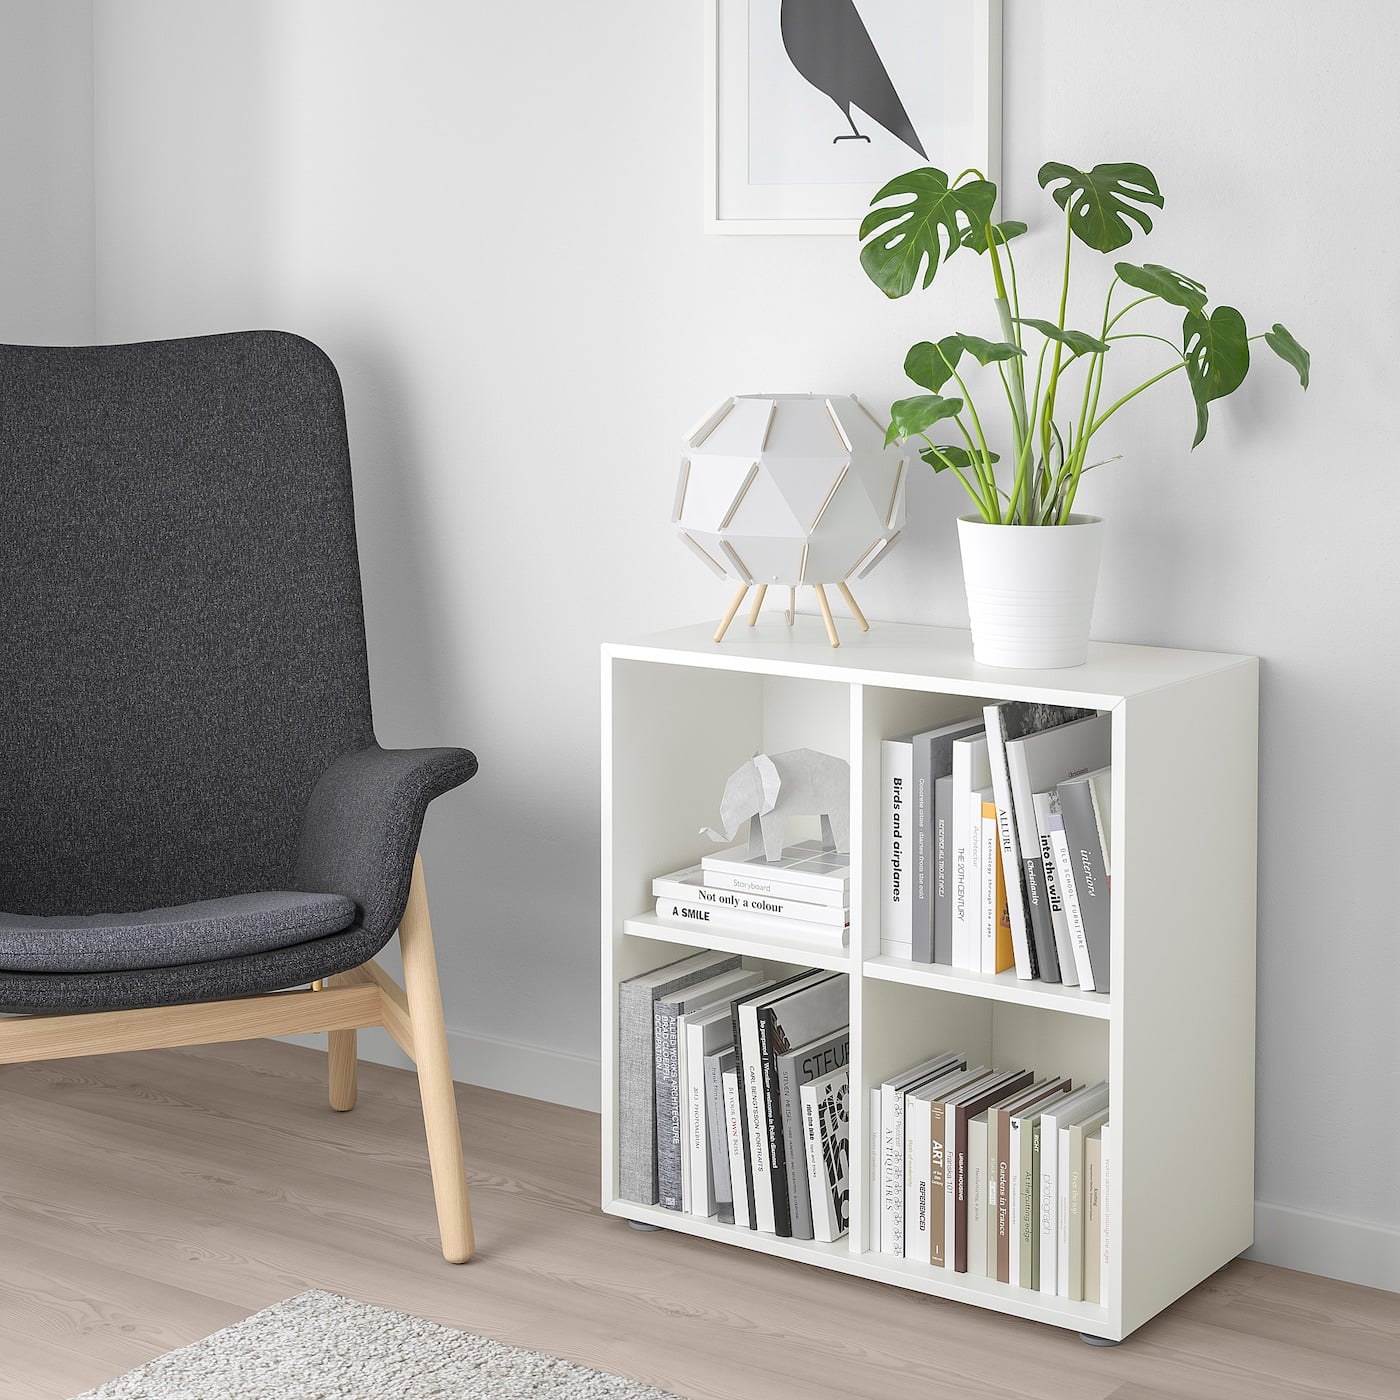 Standaard Verbanning Groet Eket Storage Combination With Feet | Transform Your Small Space Into a  Roomy Oasis With These Smart Furniture Solutions From Ikea | POPSUGAR Home  Photo 28